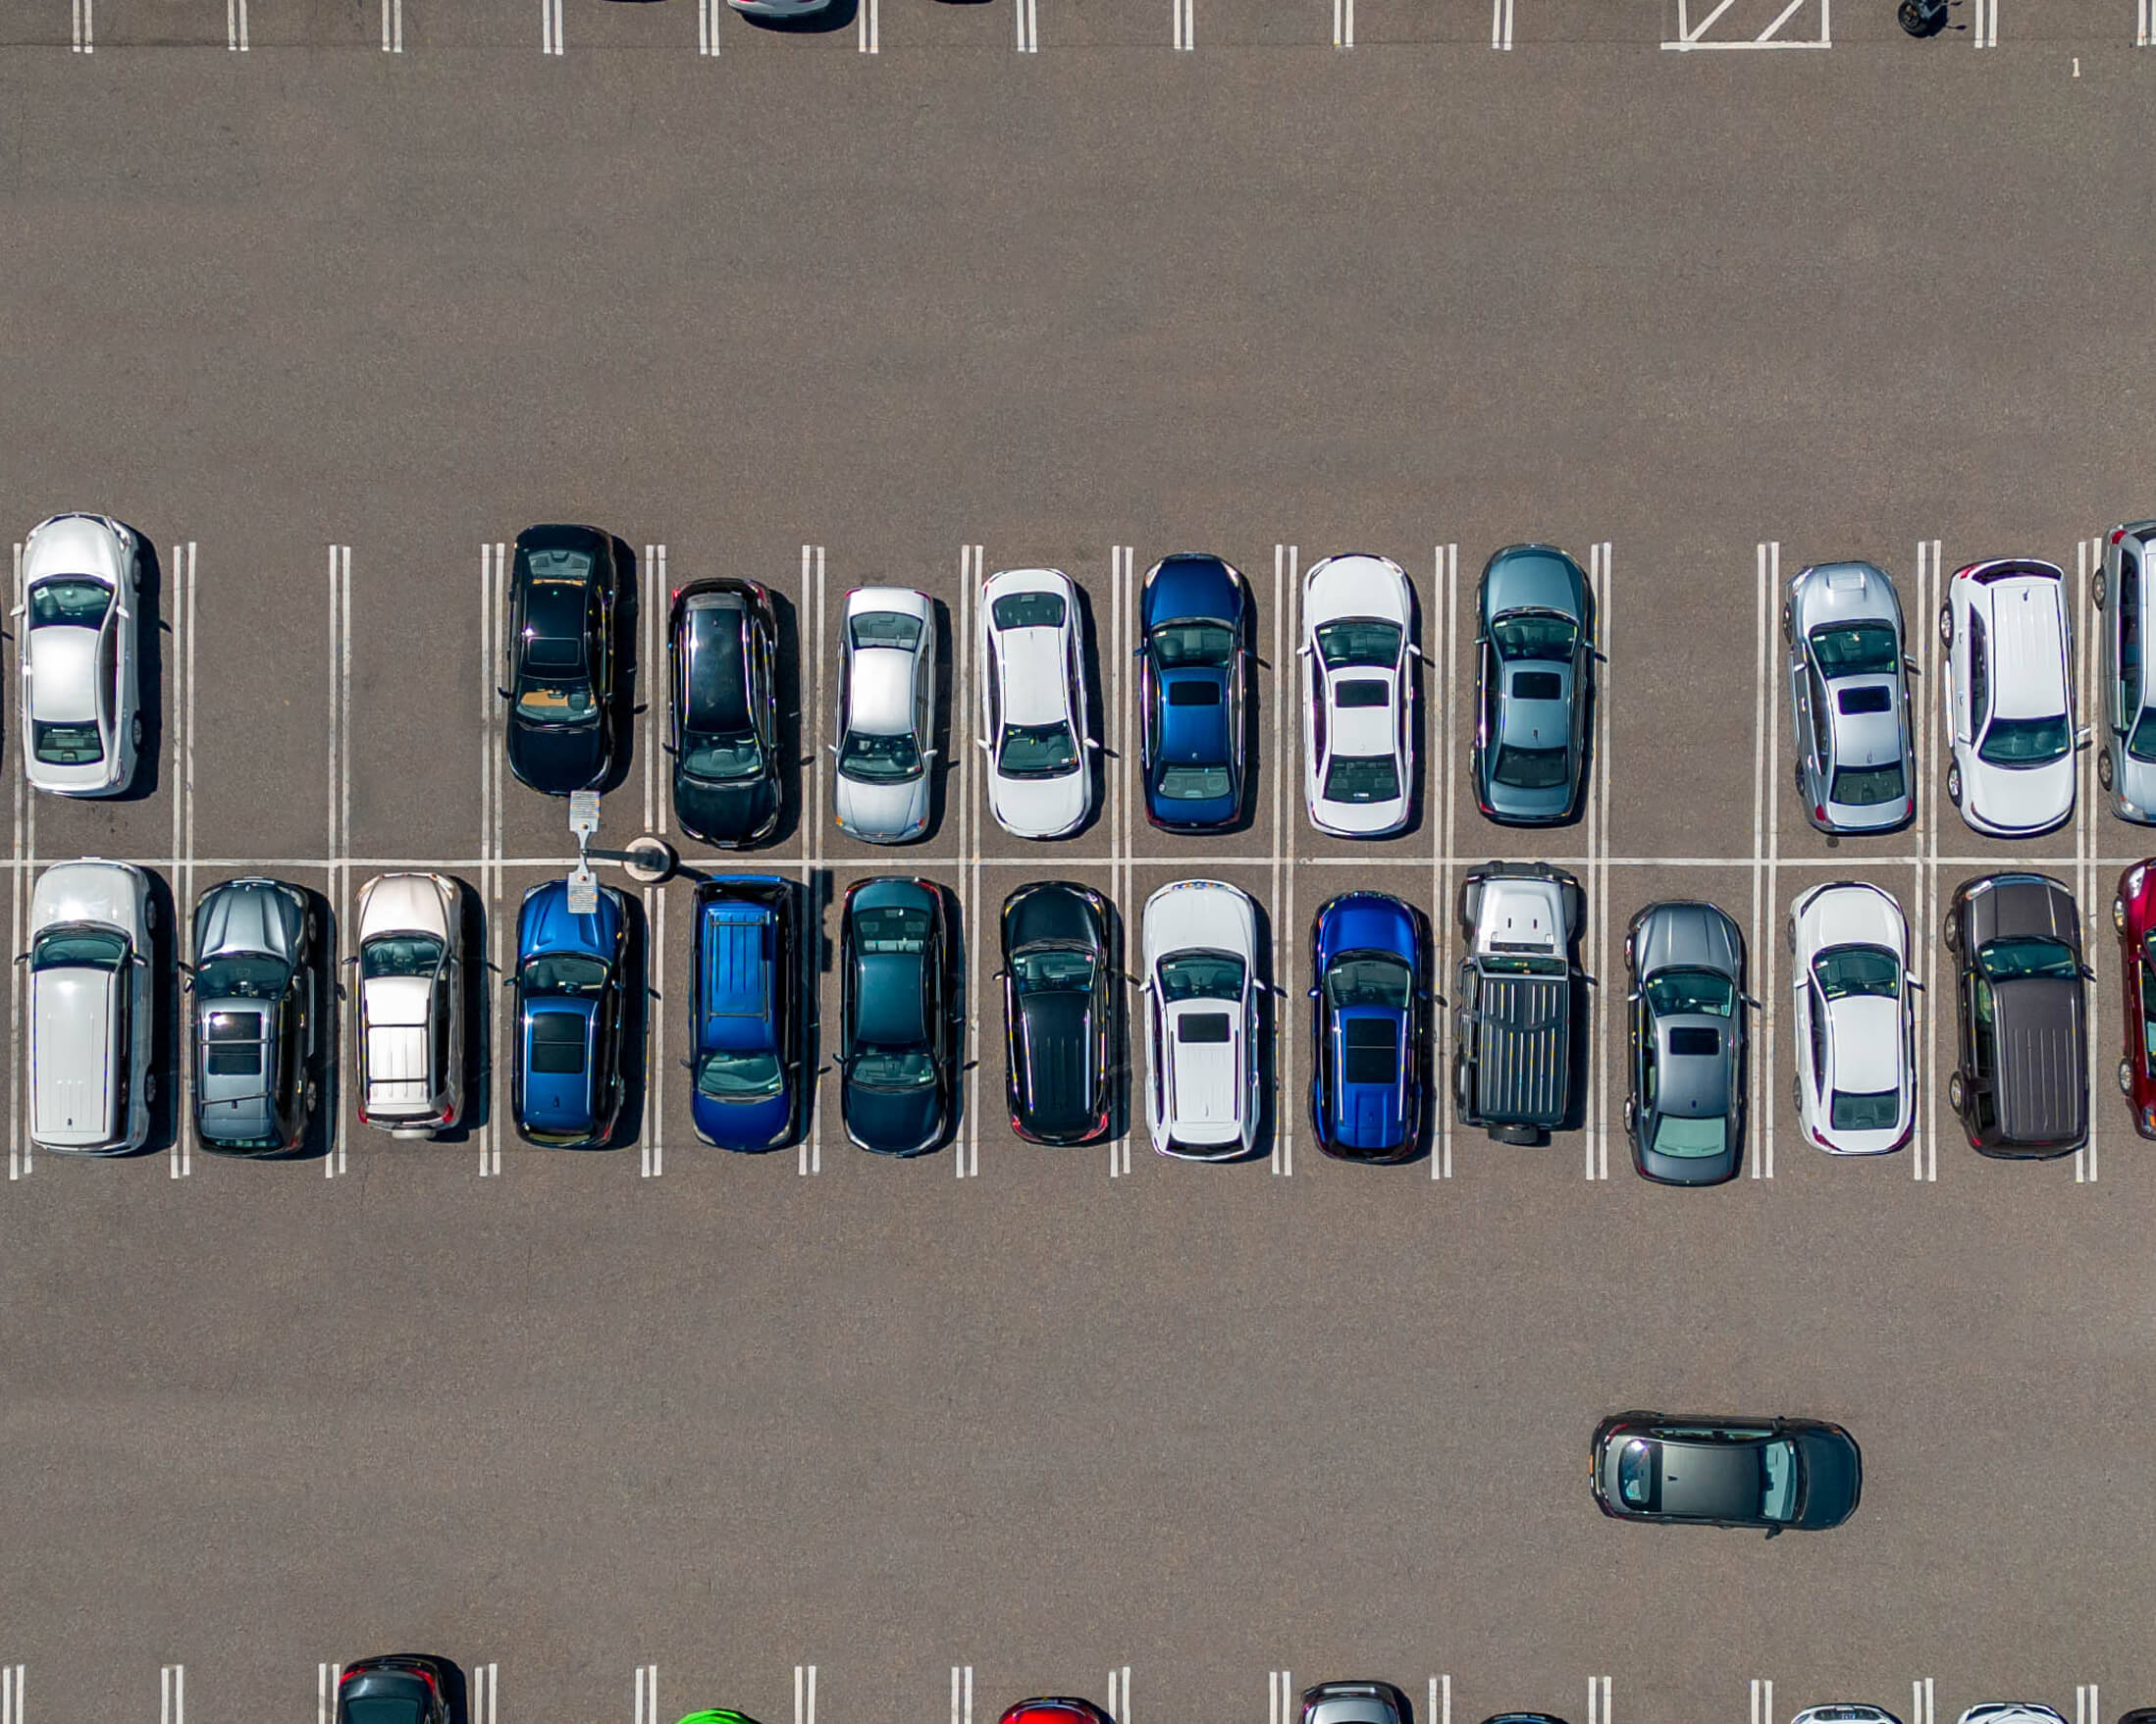 Gold Coast has patented systems they use to keep parking lots and garages safe and organized so you can focus on delivering your customers an incredible experience